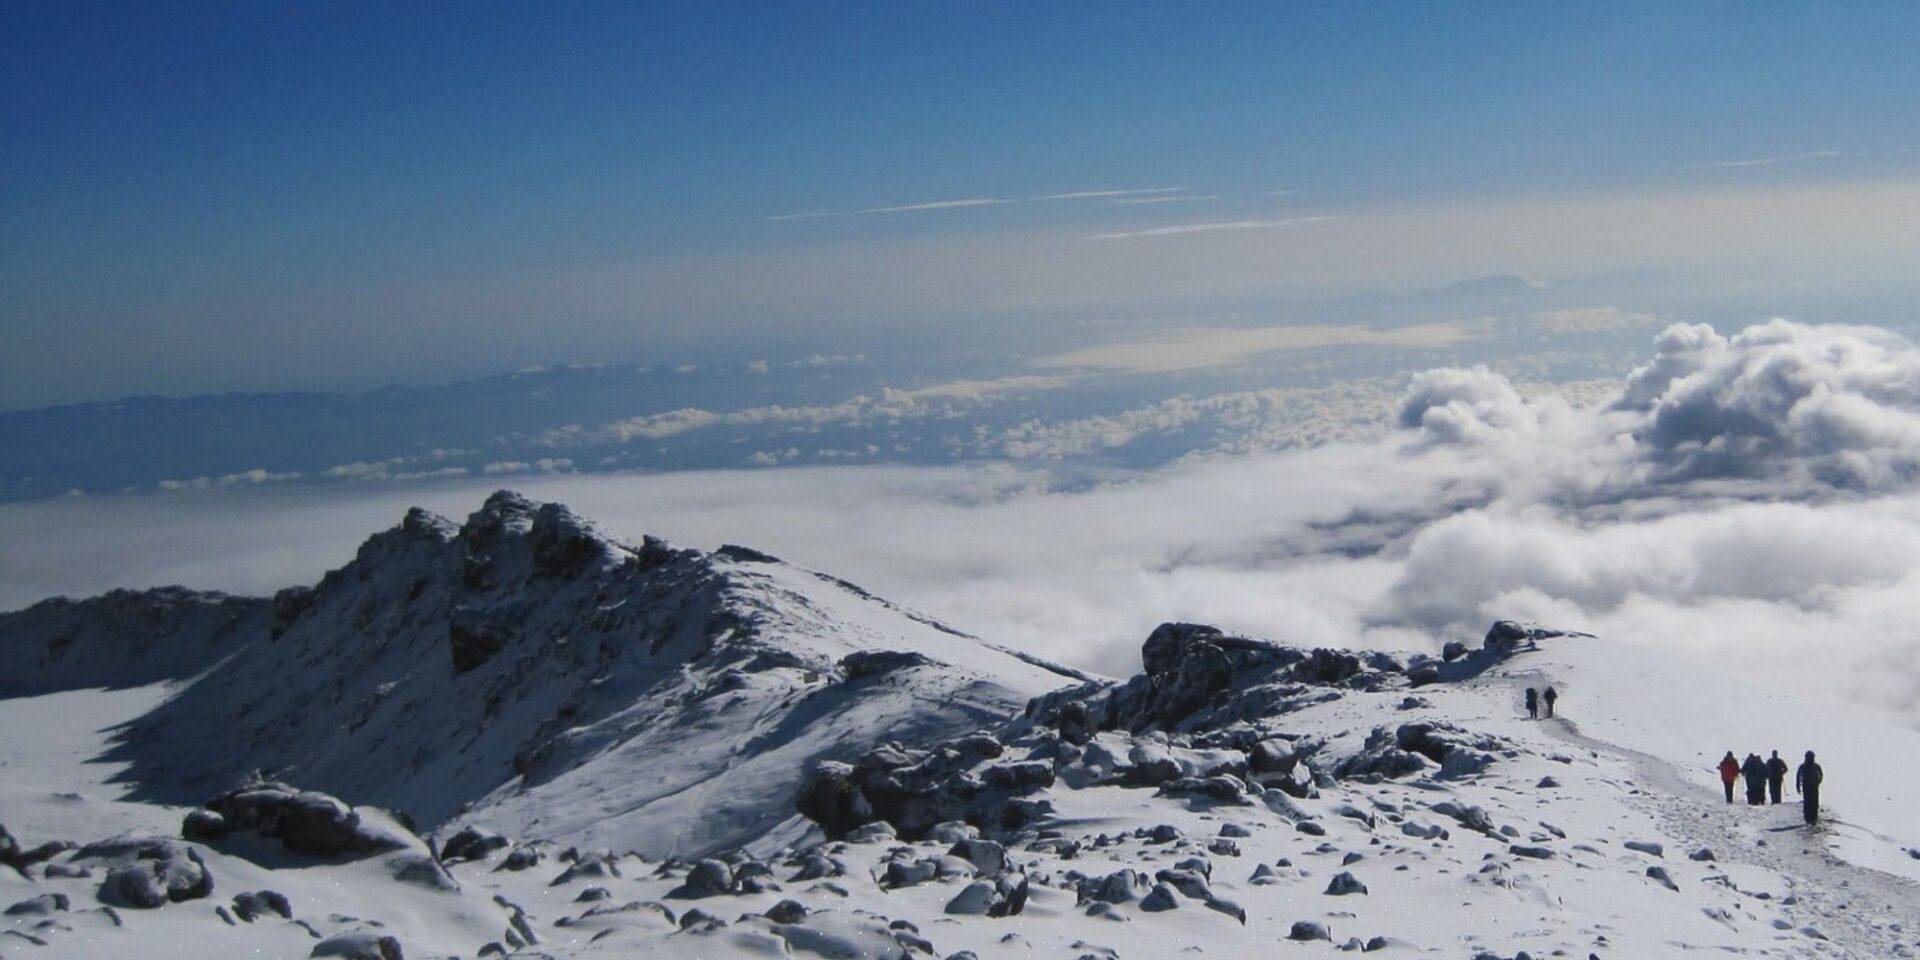 photograph of mount Kilimanjaro's summit with clouds and snow and blue sky, there are people walking to the peak